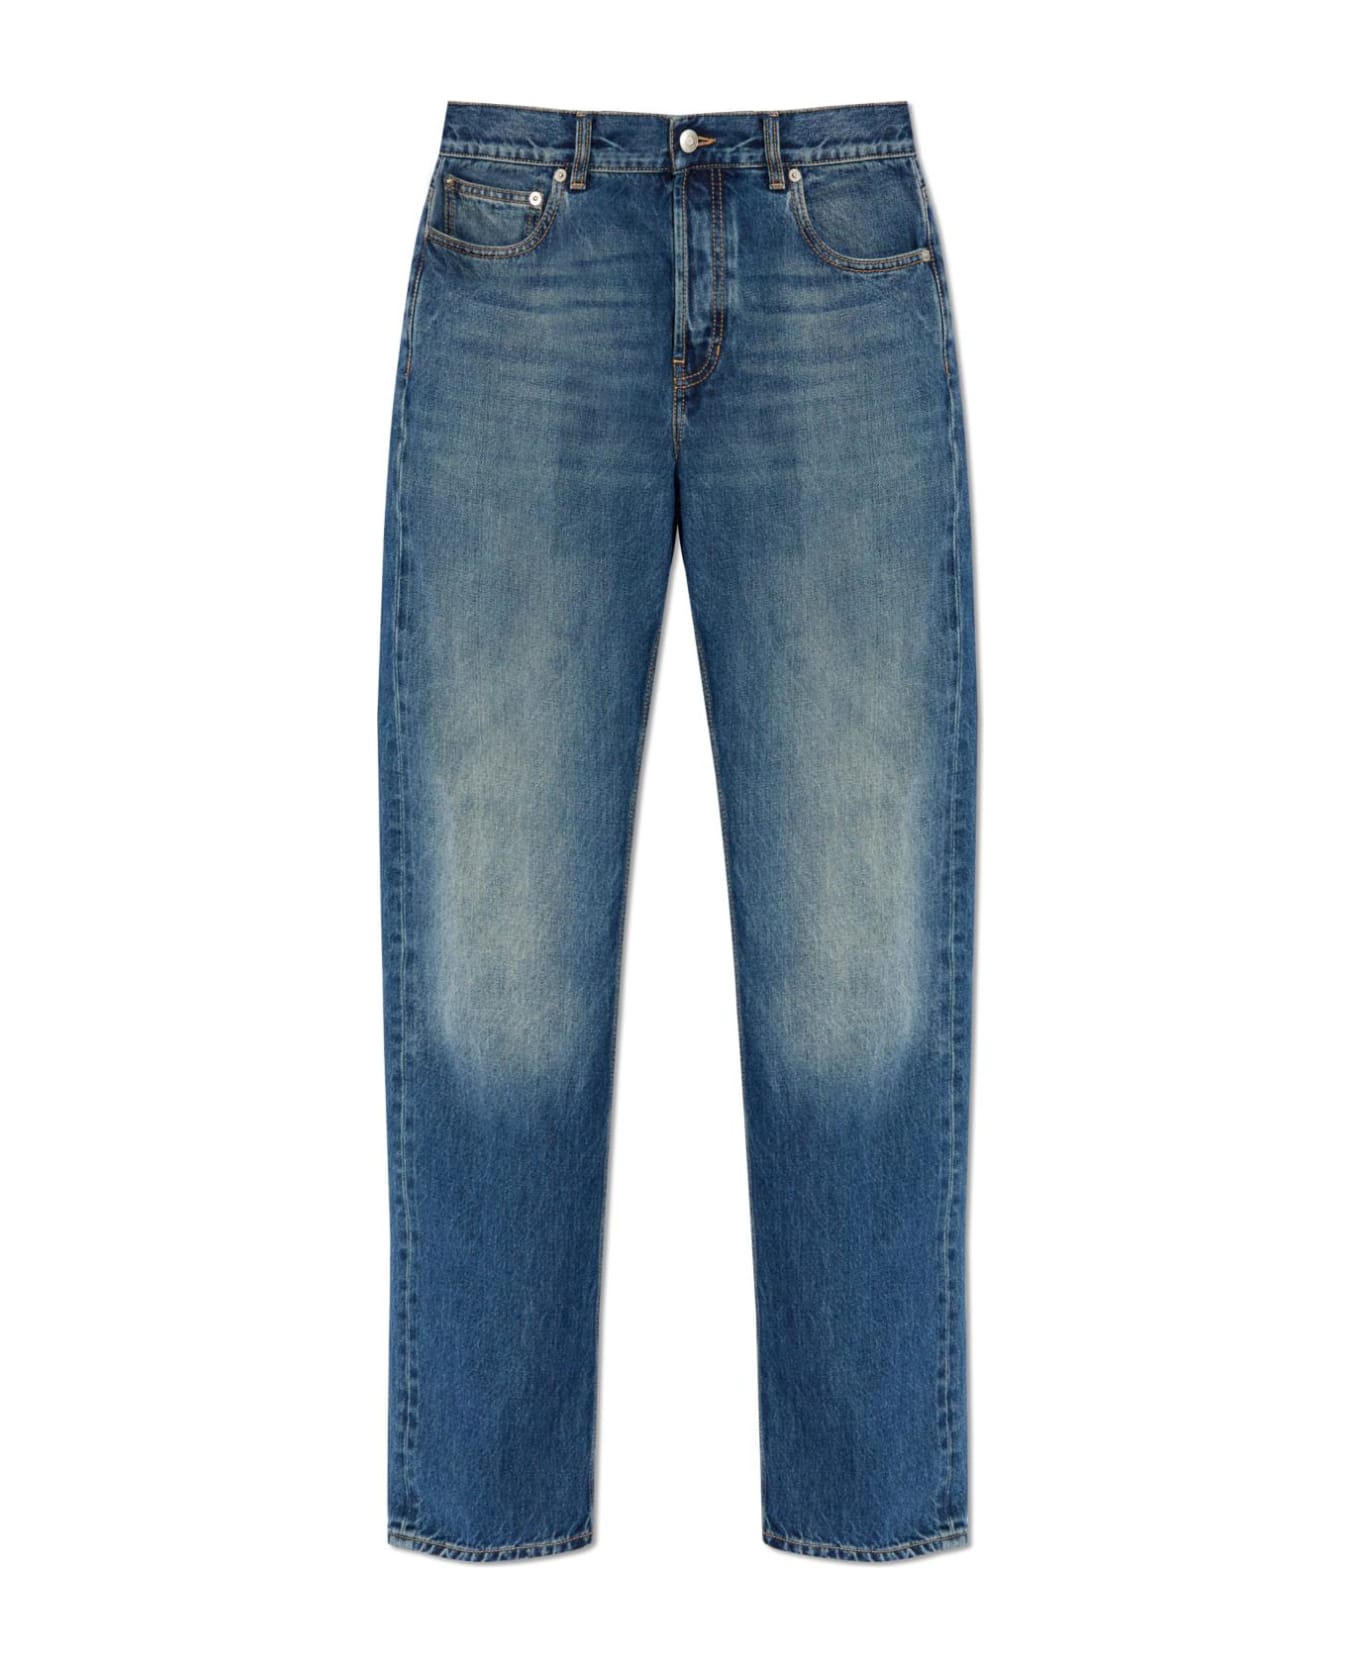 Alexander McQueen Jeans With Logo - Blue Washed デニム